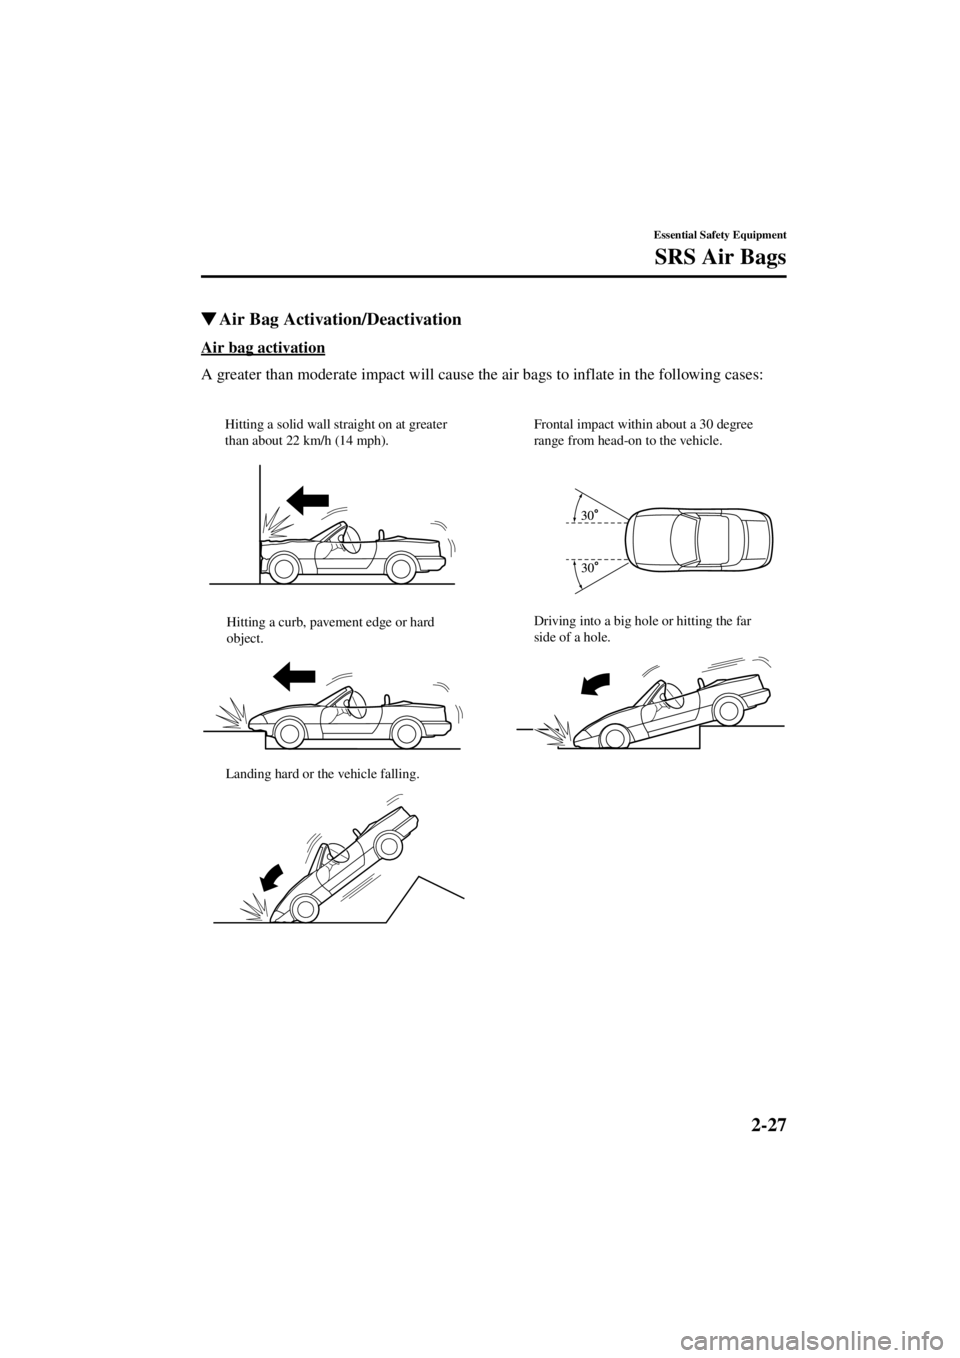 MAZDA MODEL SPEED MX-5 MIATA 2004 Owners Guide 2-27
Essential Safety Equipment
SRS Air Bags
Form No. 8T02-EA-03L
Air Bag Activation/Deactivation
Air bag activation
A greater than moderate impact will cause the air bags to inflate in the following